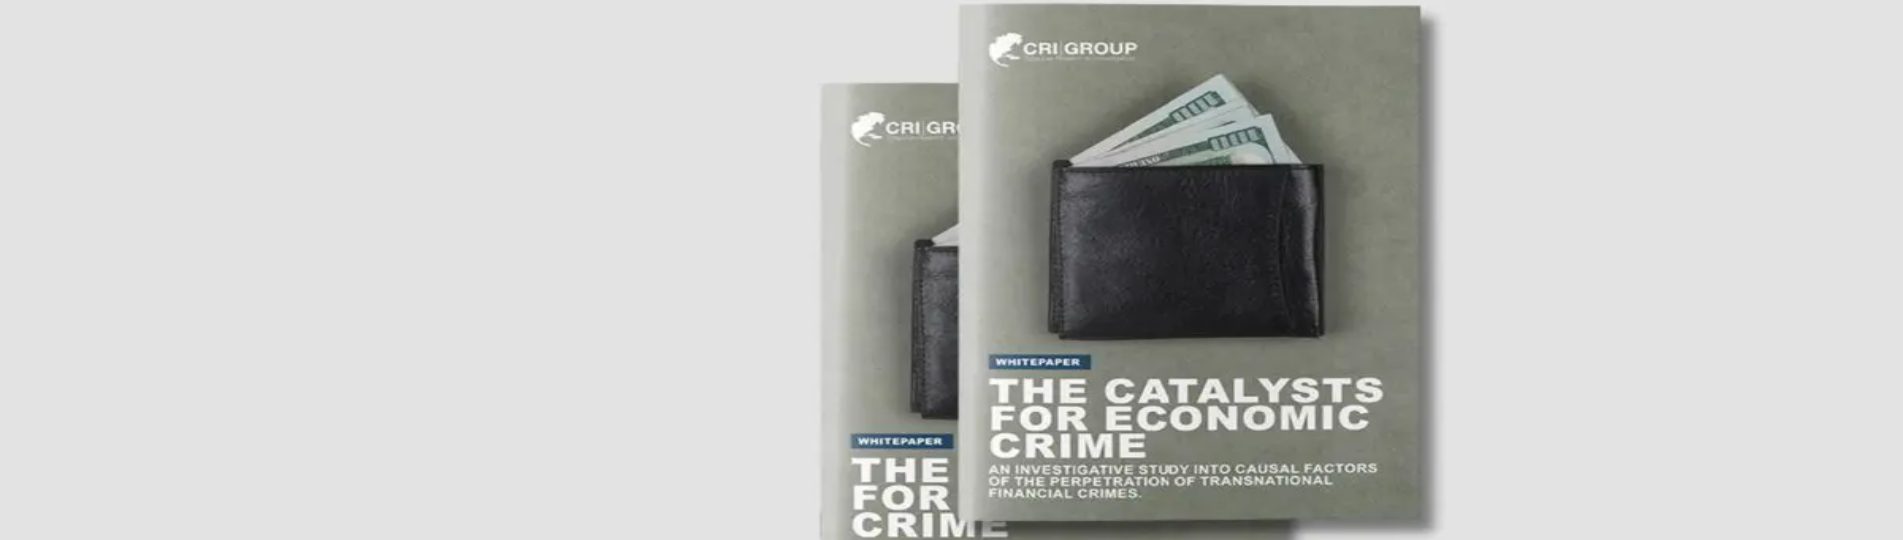 The causal factors of financial crimes - A Case Study by CRI Group